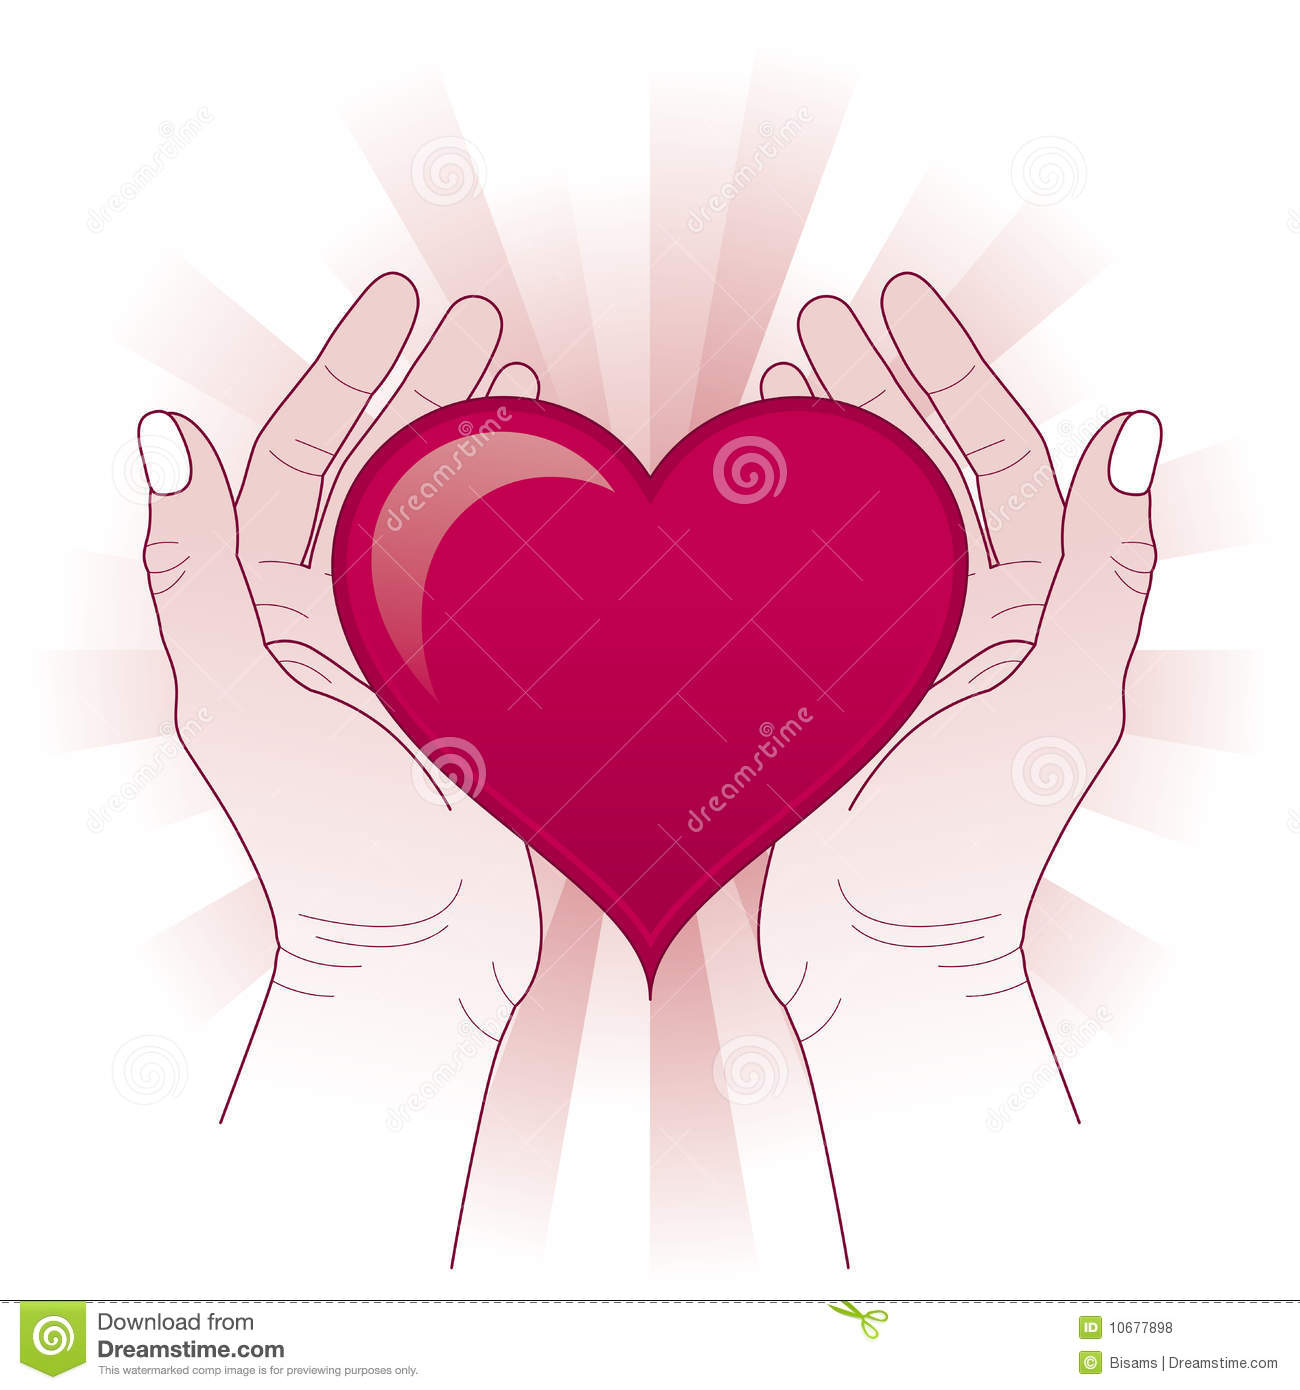 Hands Protecting The Heart  Heart In Hands Concept